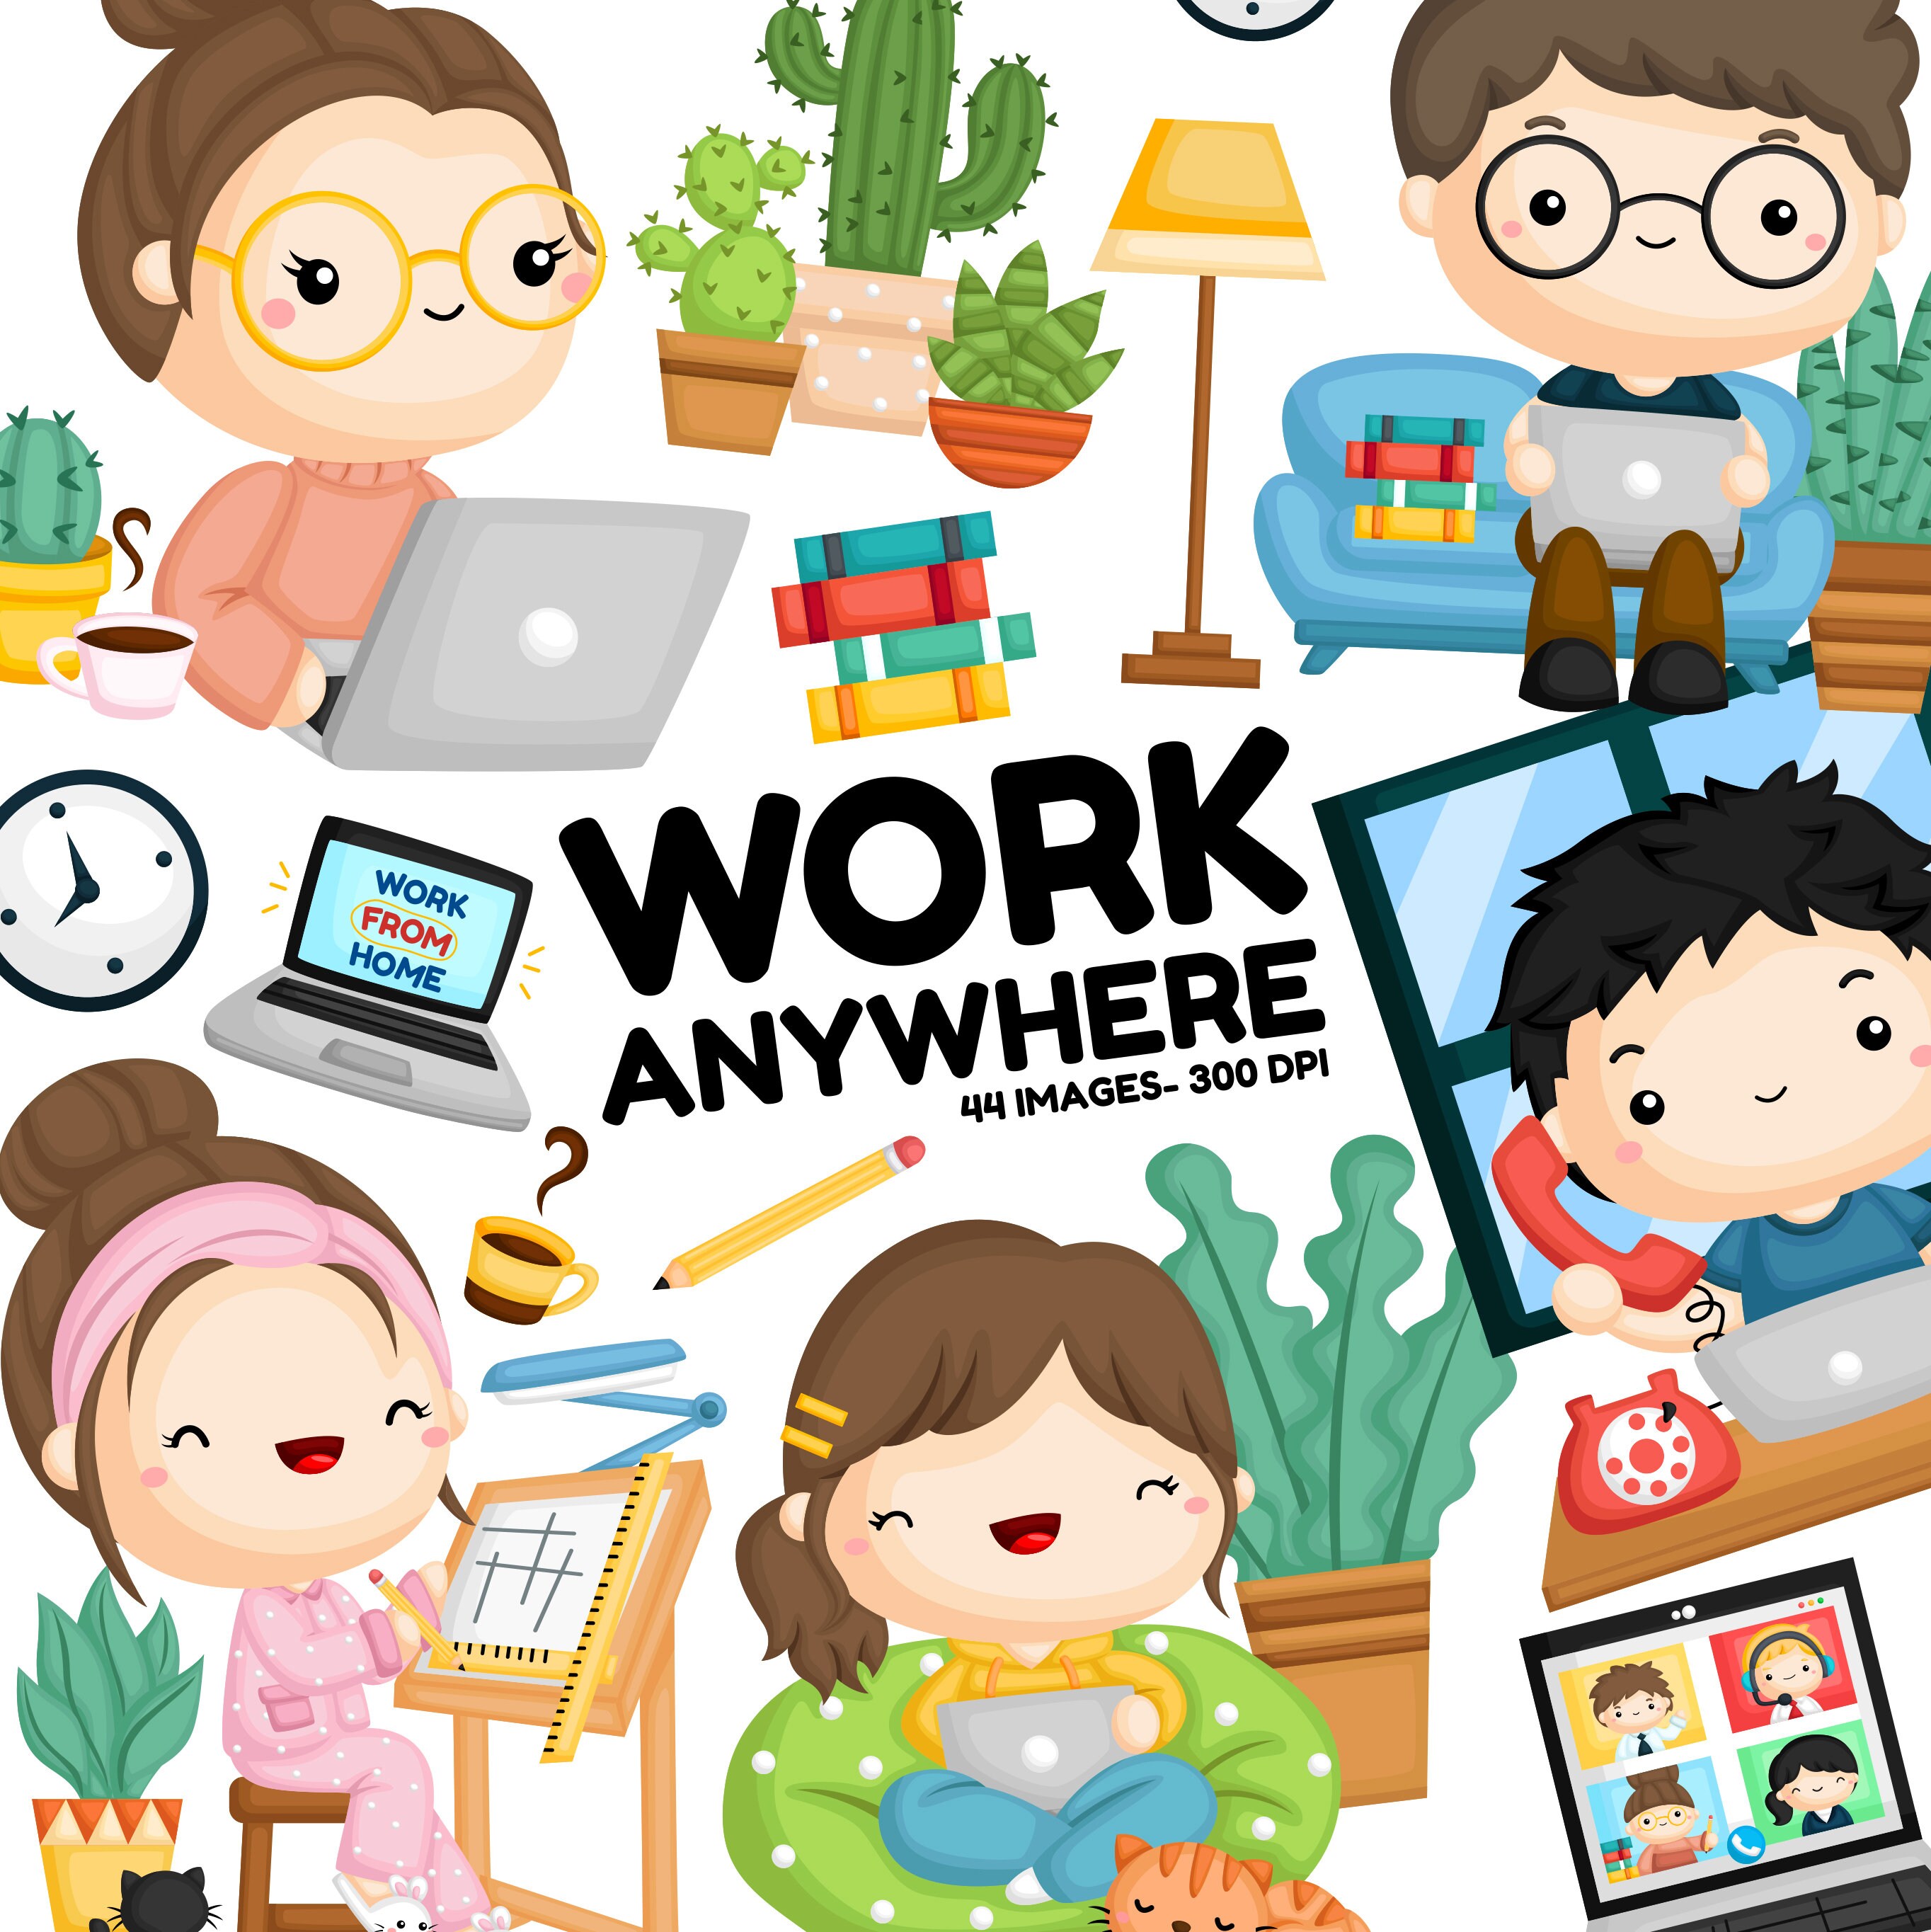 Work Anywhere Clipart Working Clipart Work from Home | Etsy